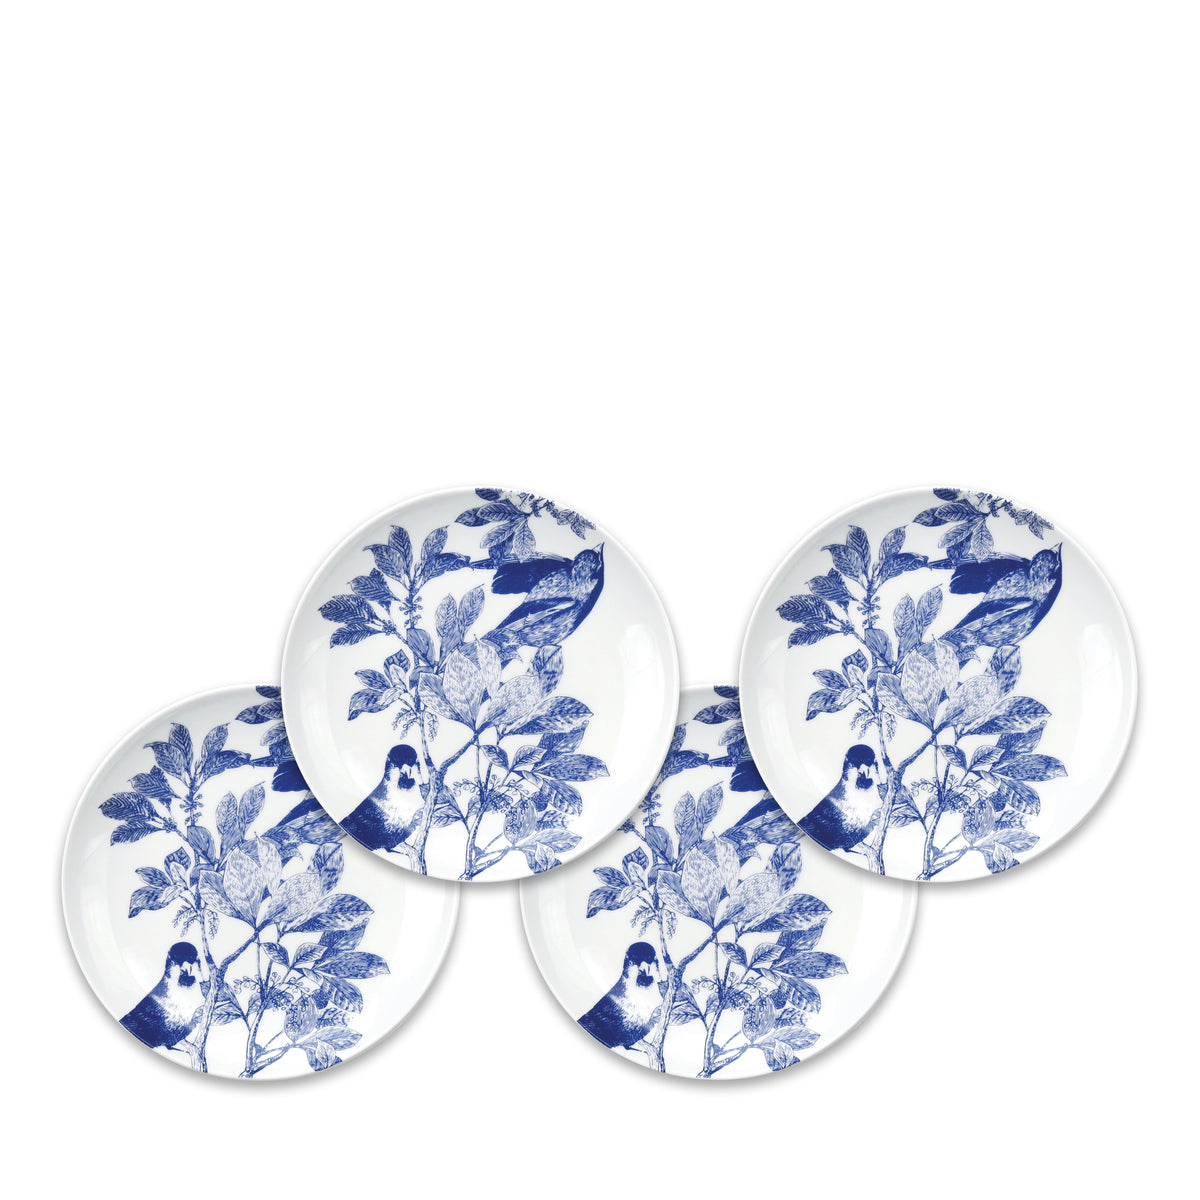 Four Caskata Artisanal Home Arbor Blue Birds Small Plates, with a blue design of birds and botanical details on leafy branches, crafted from heirloom-quality porcelain.